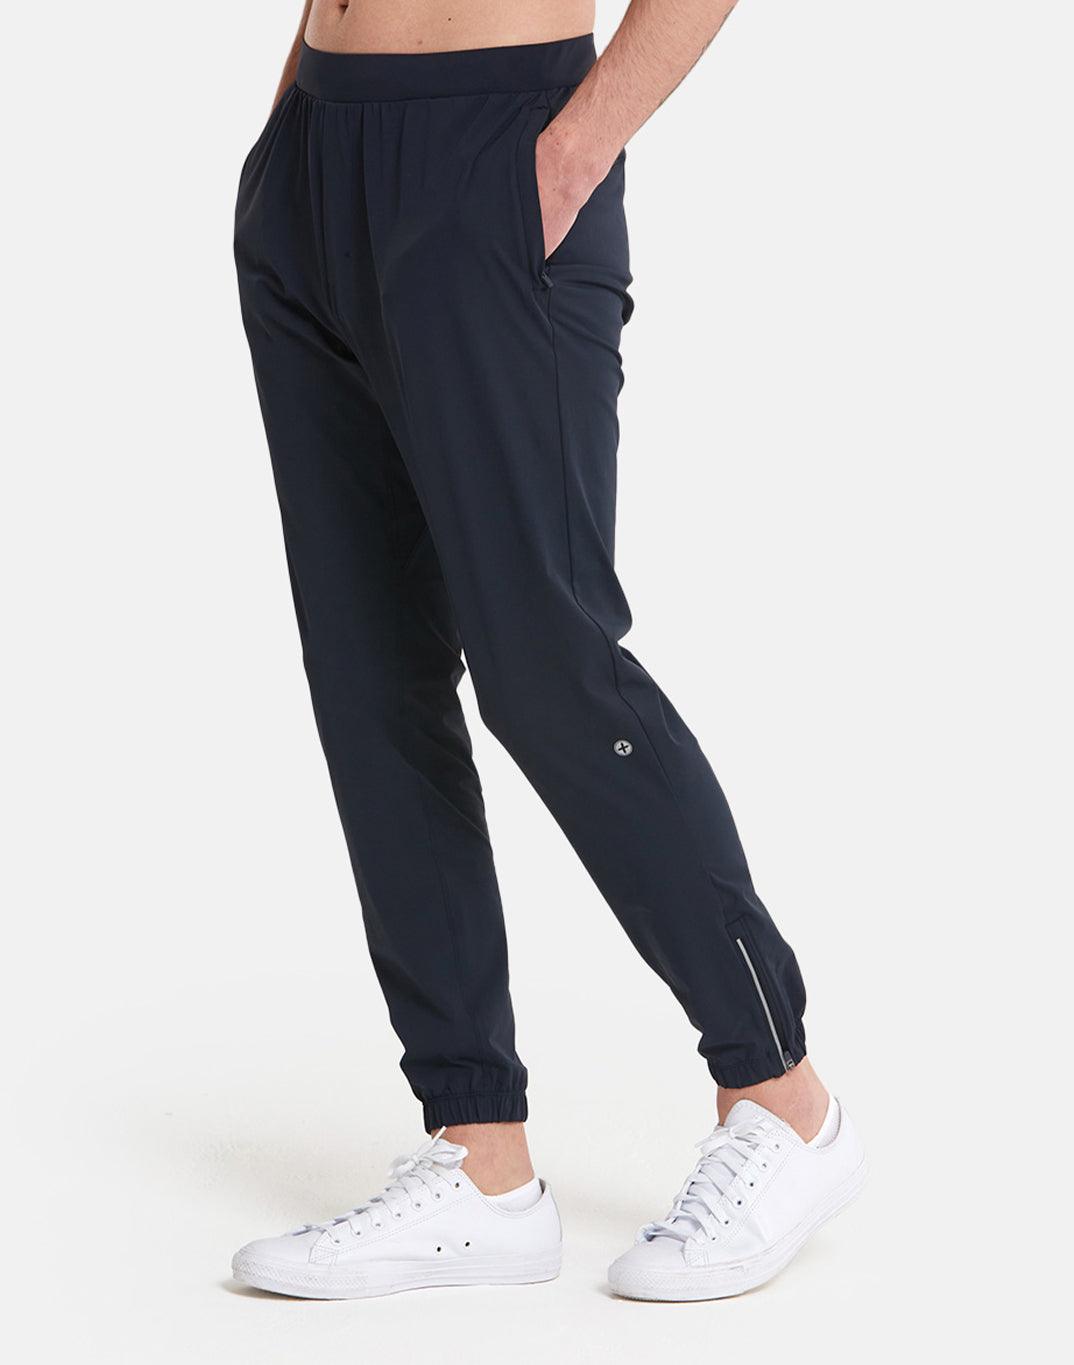 In Motion Jogger in Obsidian - Joggers - Gym+Coffee